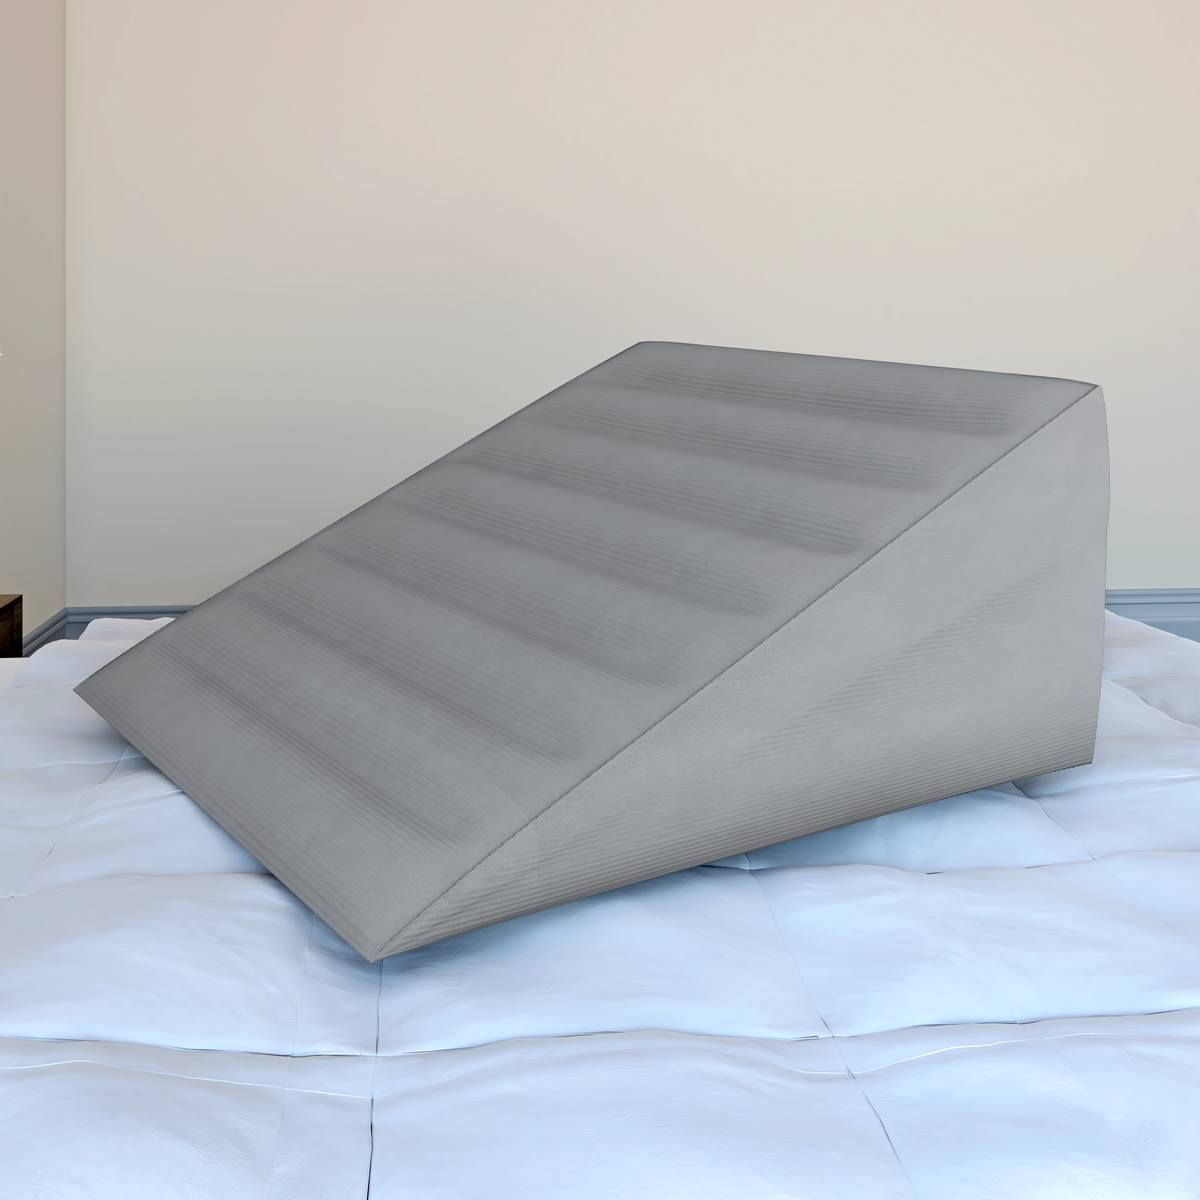 Thomasville(R) Inflatable Adjustable Wedge Pillow